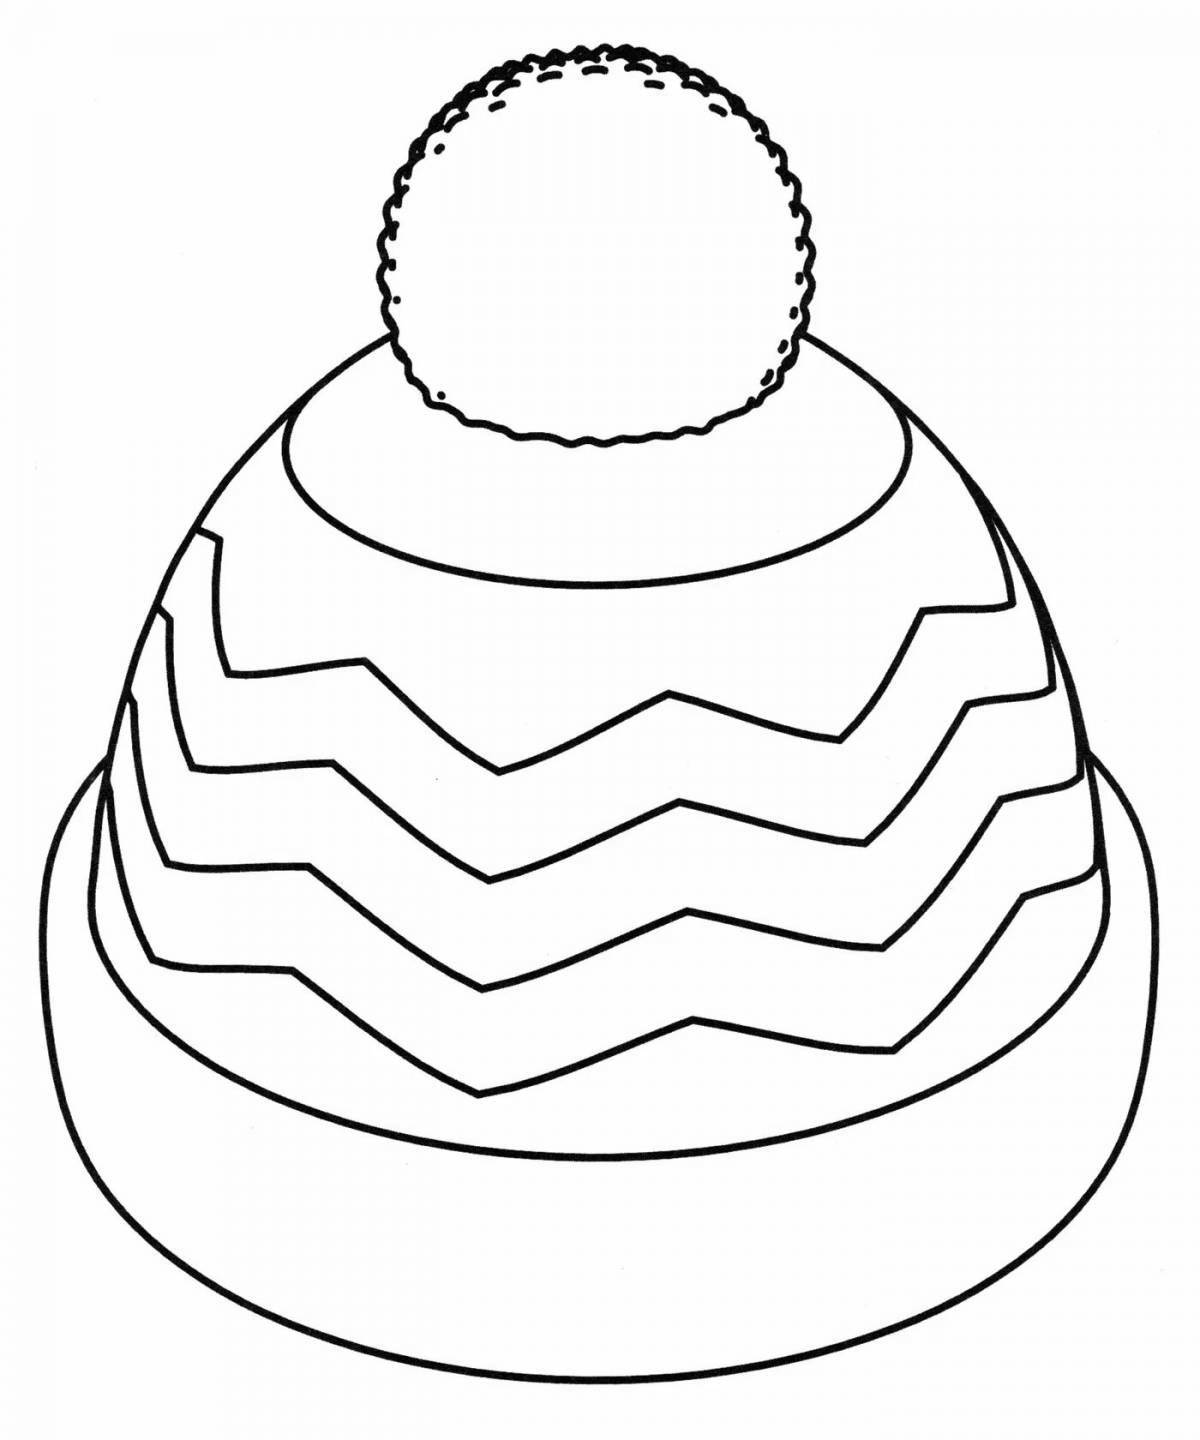 Colourful hat coloring page